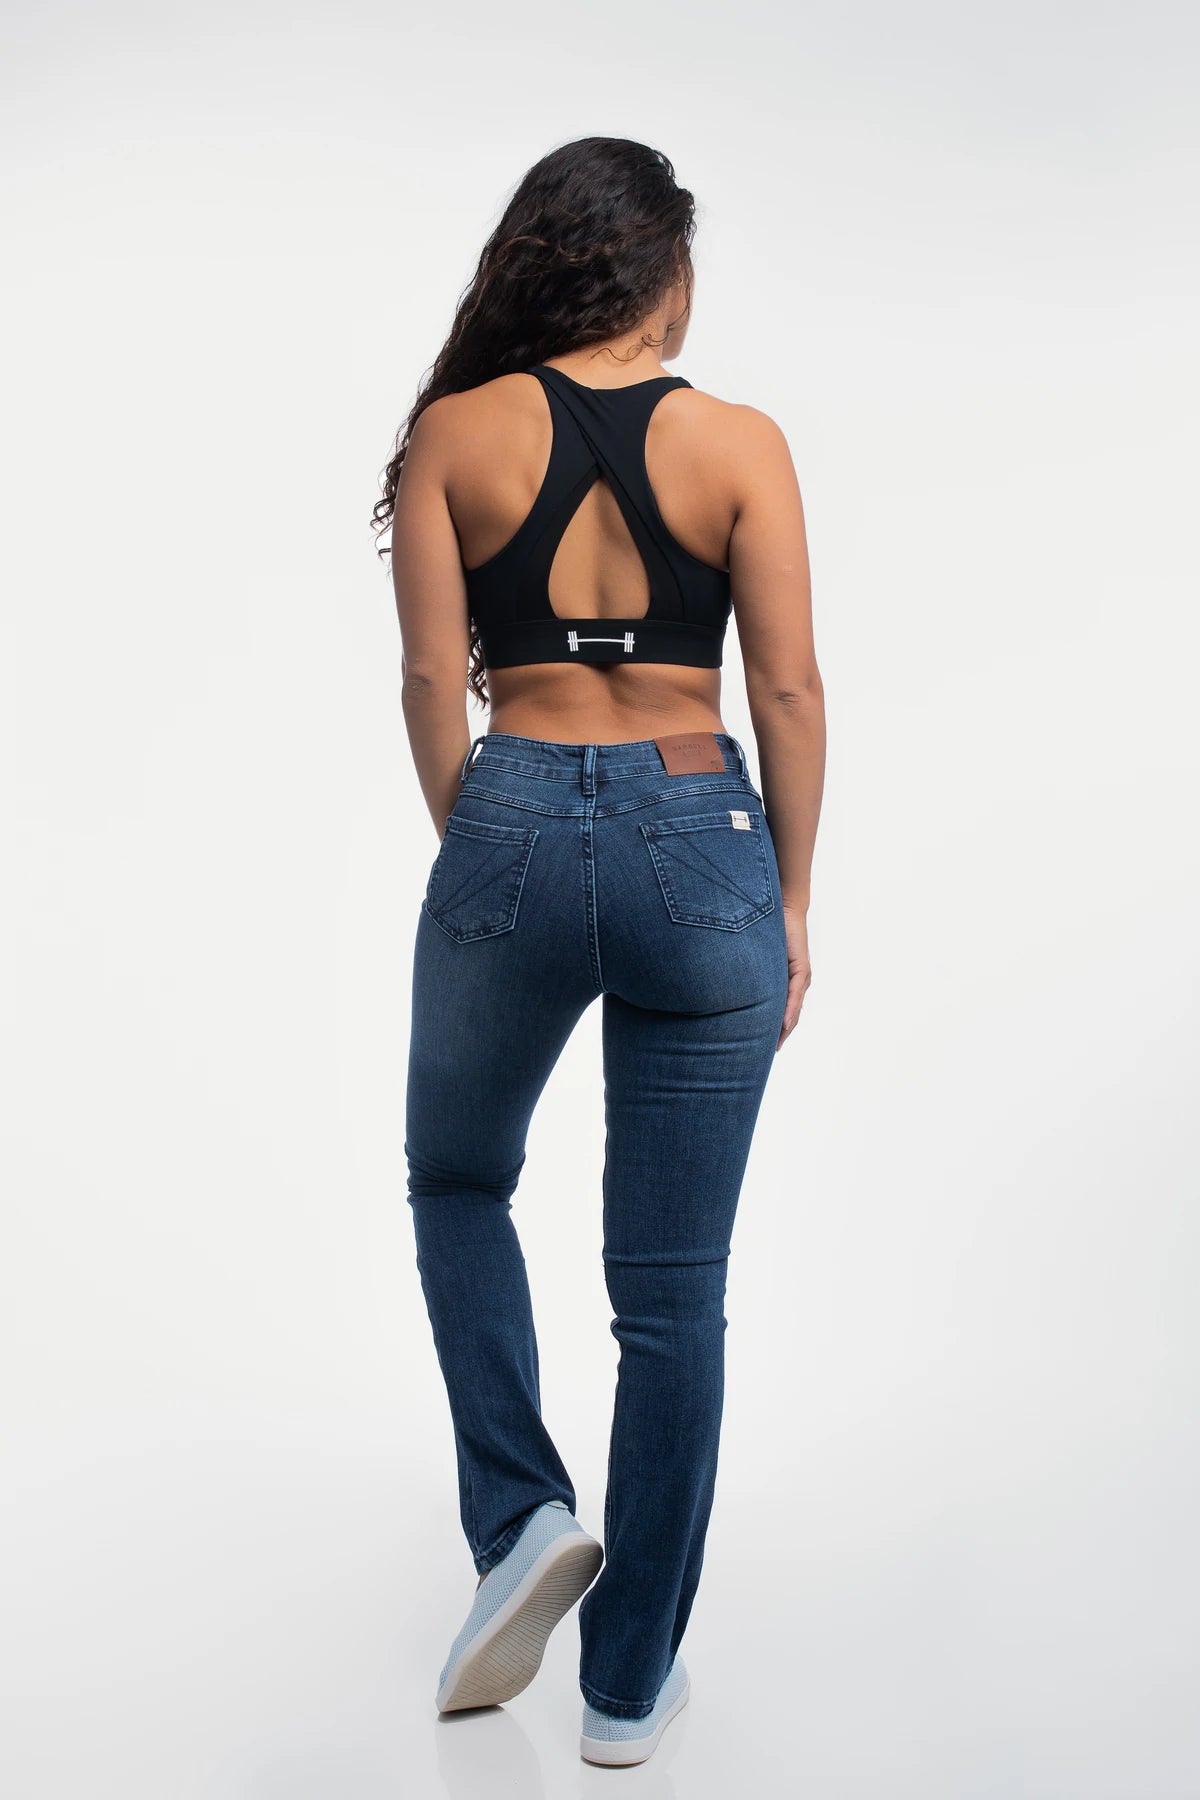 Womens Bootcut Athletic Fit Jeans